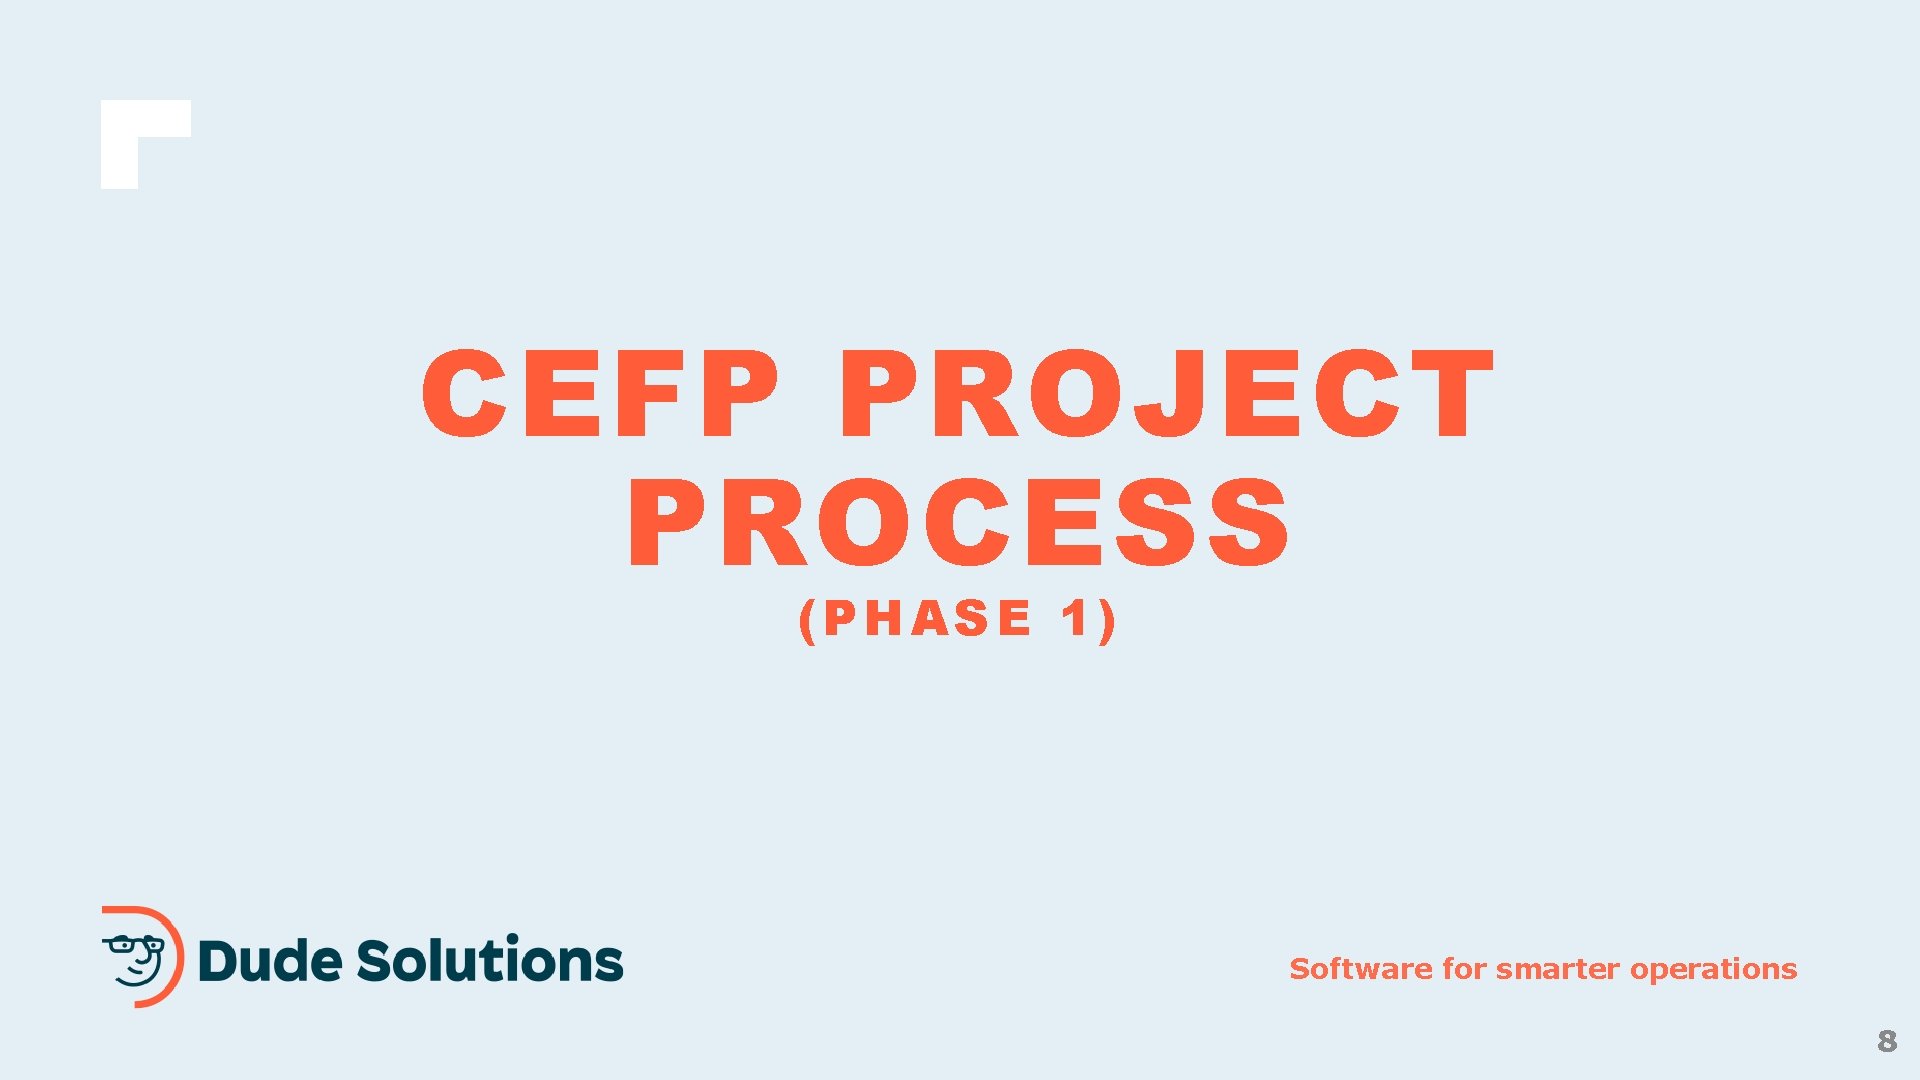 CEFP PROJECT PROCESS (PHASE 1) Software for smarter operations 8 